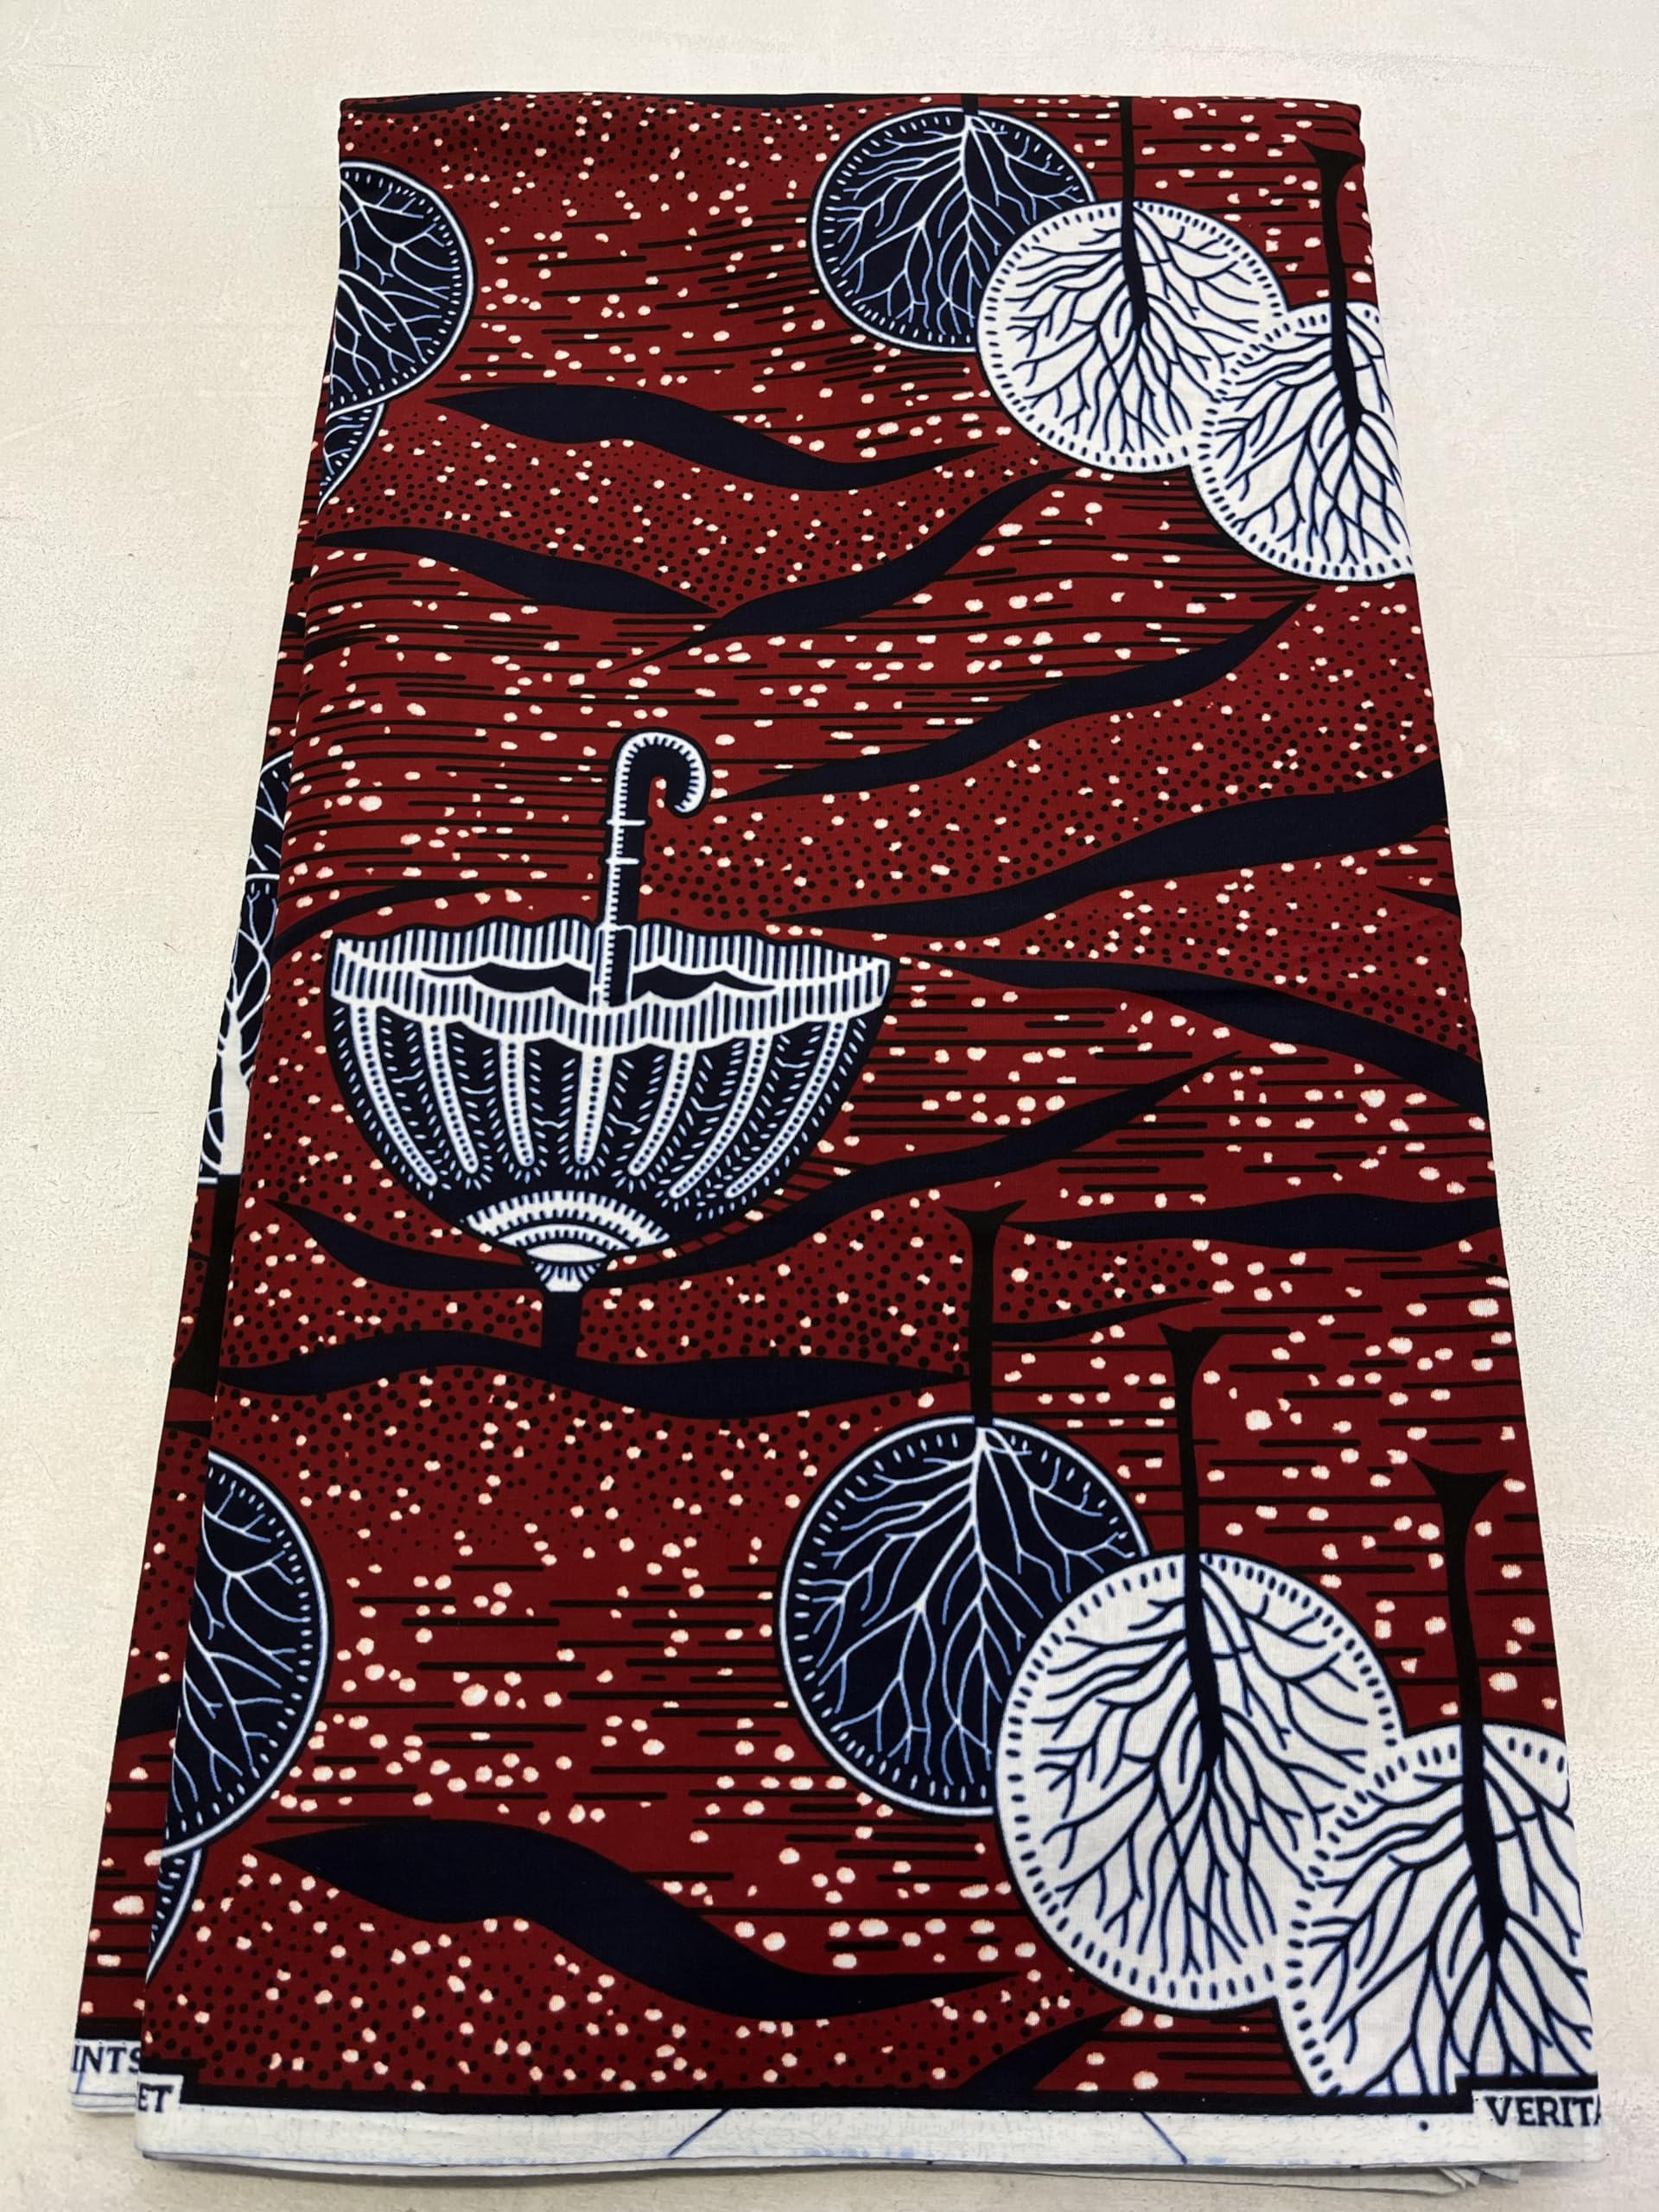 Umbrella and Trees Design African Guaranteed Wax Block Prints Fabric/African Ankara Wrapper Fabric Wax Fabrics /-Sell by 6 Yards-100% Cotton-for Dresses- Dark-Red, Dark-Blue, White, Black